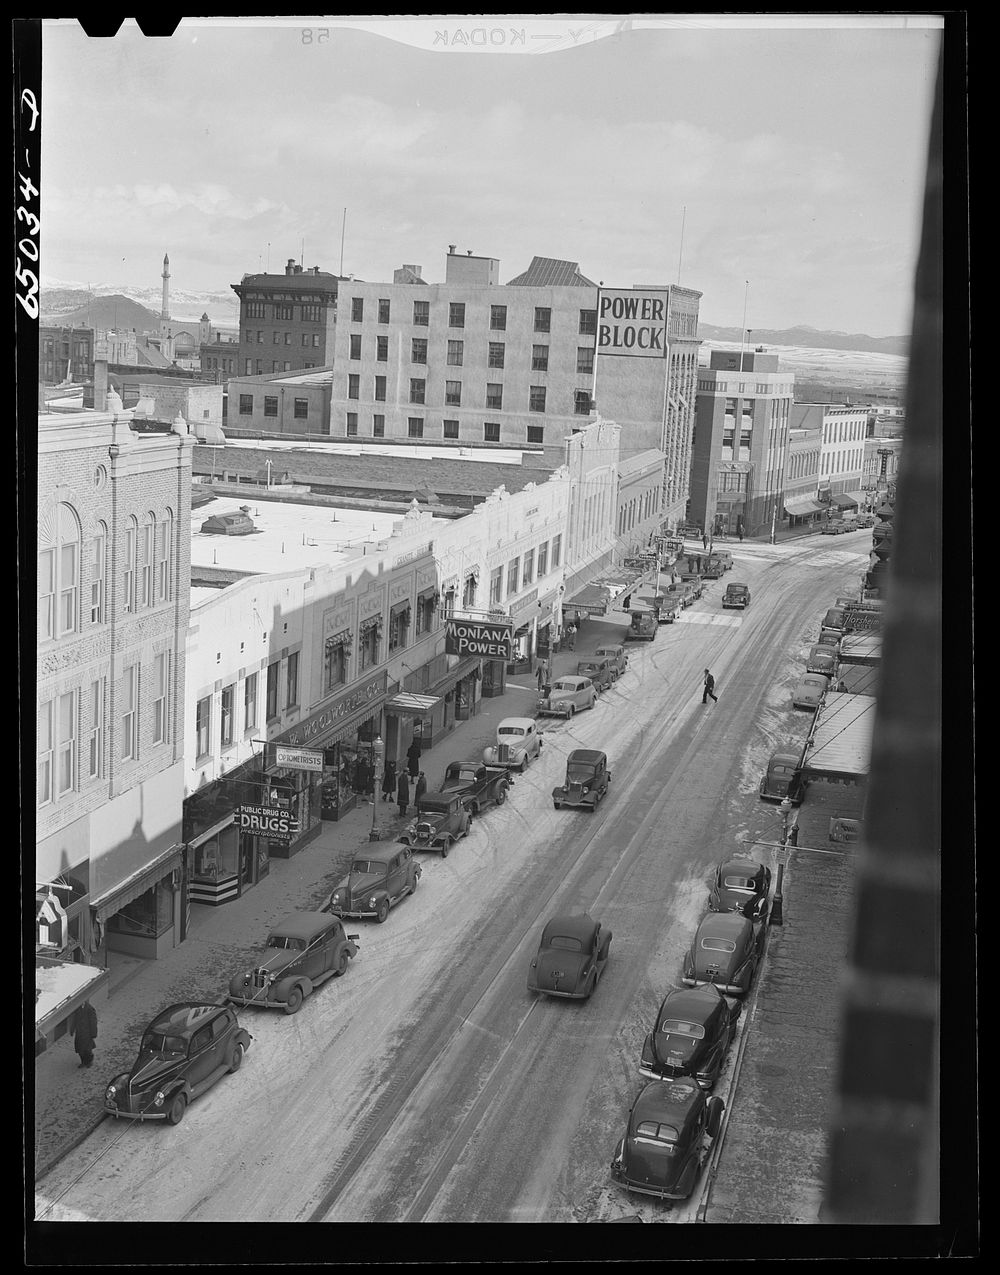 Helena, Montana. Sourced from the Library of Congress.